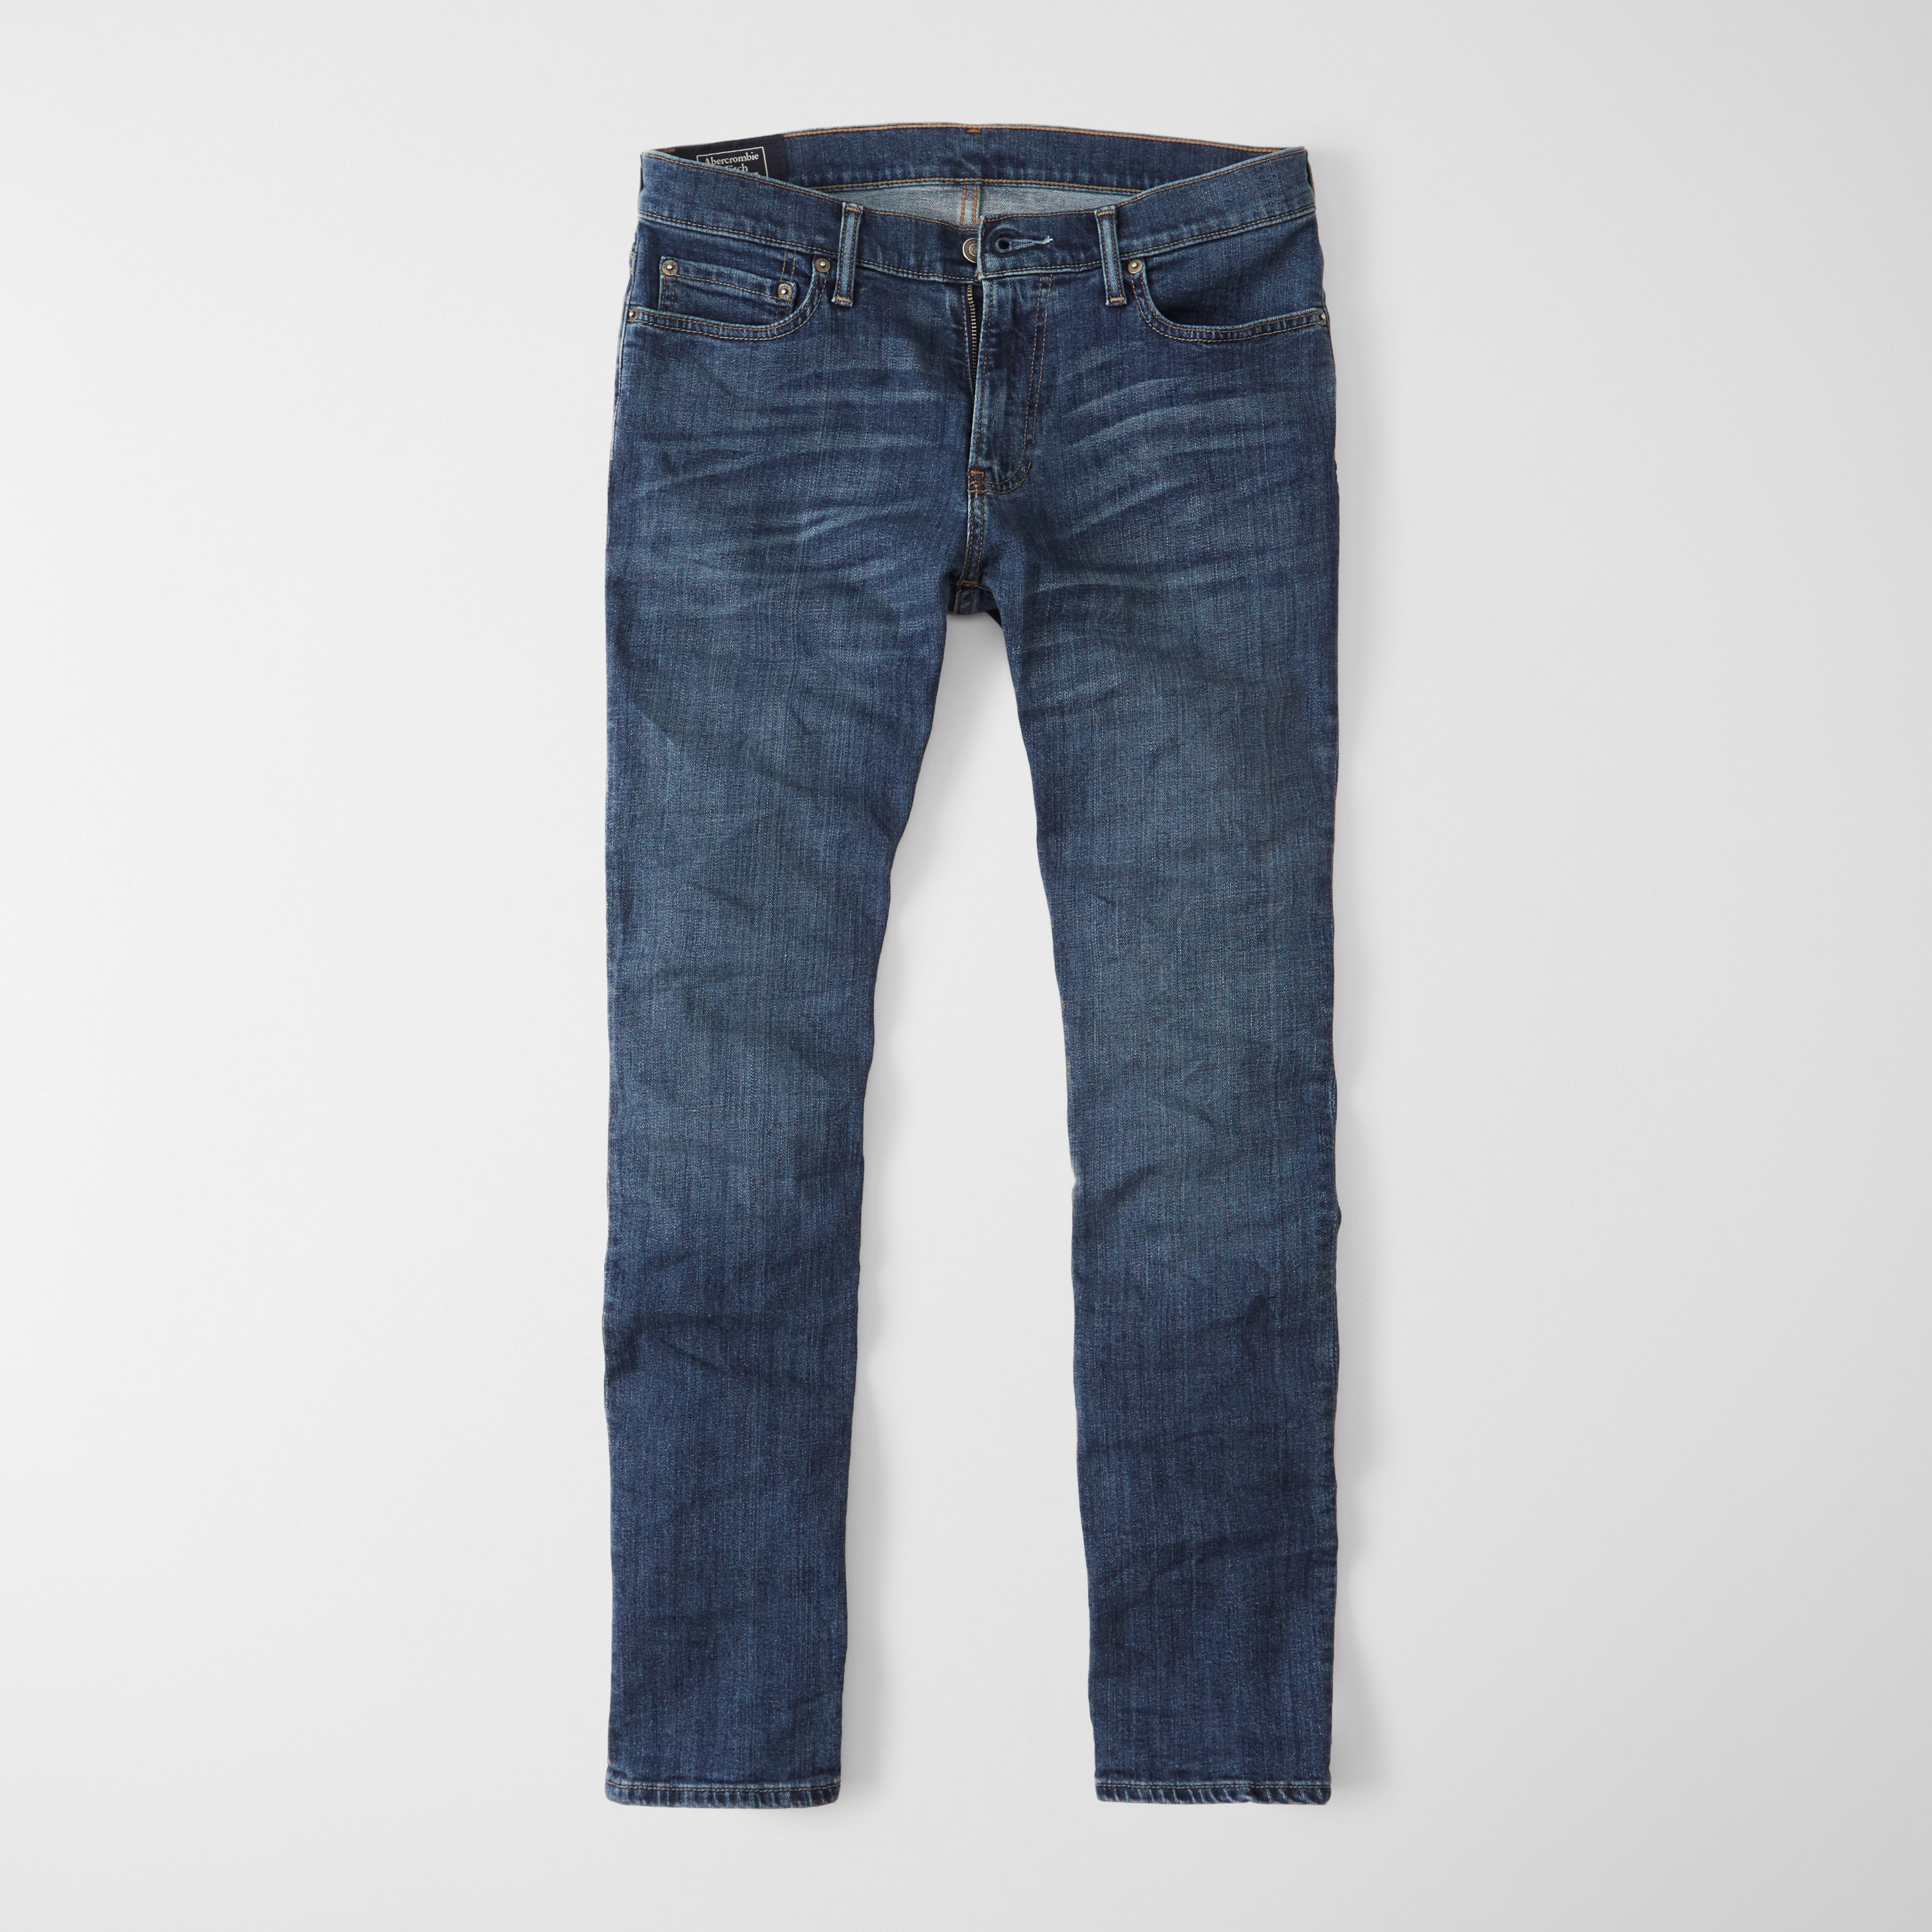 abercrombie & fitch jeans for men